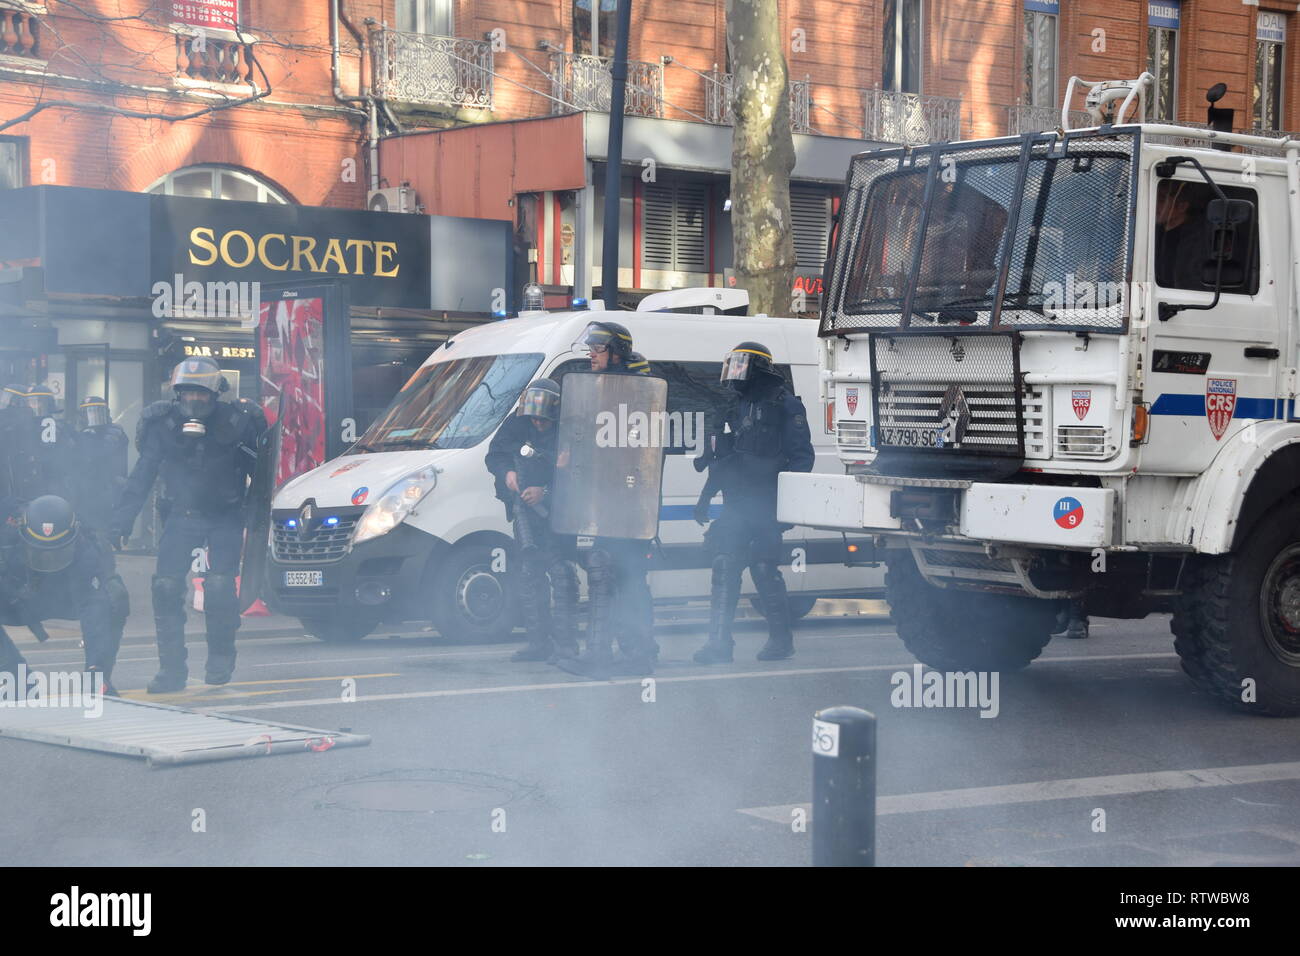 Toulouse, France. 2nd March 2019. The weekly serious clashes occured once more time on March the 2nd 2019  in the streets of Toulouse, France, between riot police units and the yellow vest (gilets jaunes). Police largely used tear gas. Credit: Corentin LE GALL/Alamy Live News Stock Photo